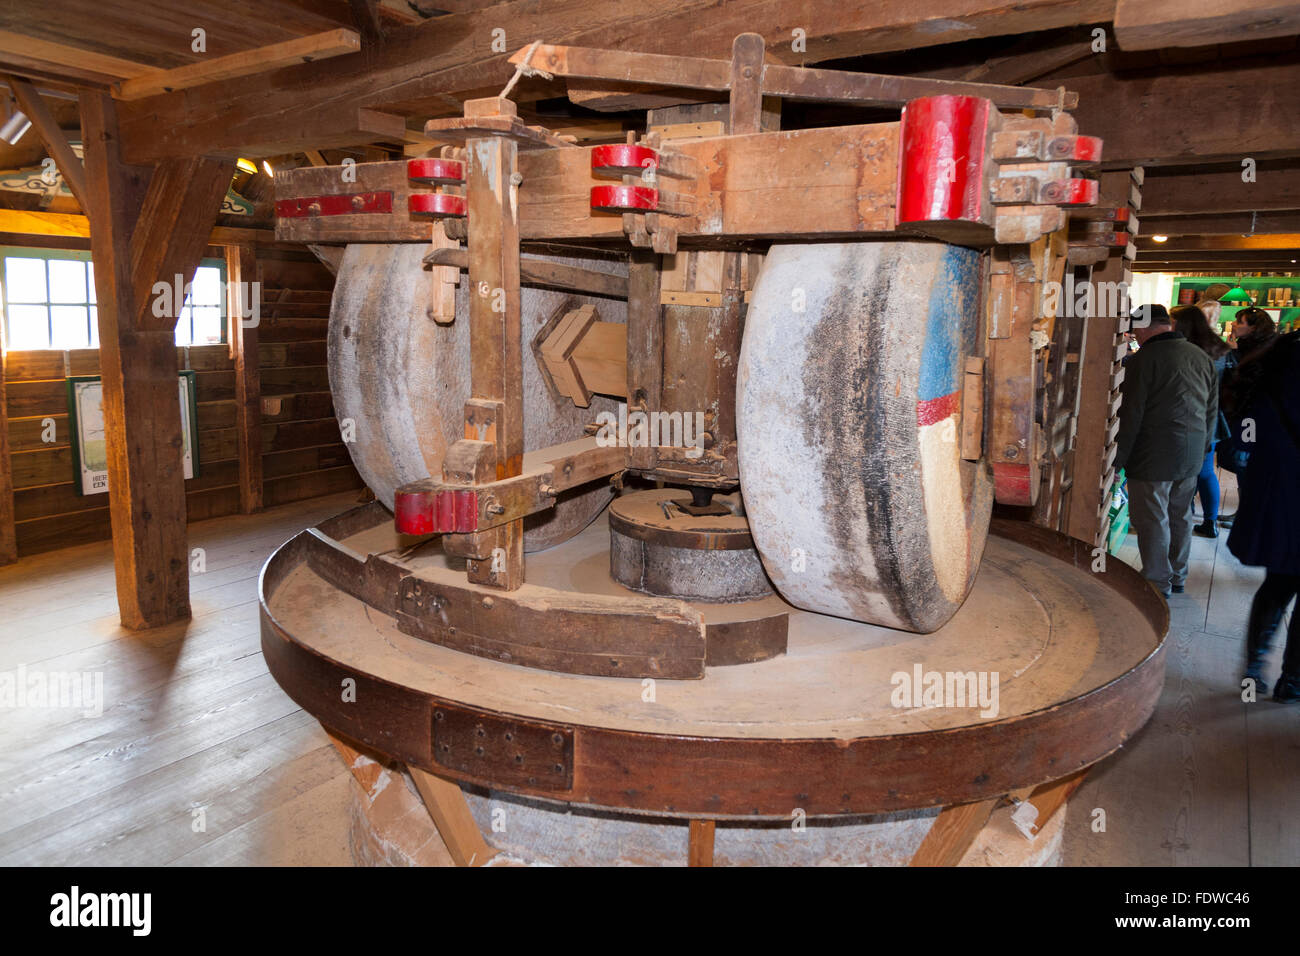 Workings inside Spice Windmill De Huisman, with three pairs of millstones grinding wheel wheels which grind various spices. Zaanse Schans. Netherlands Stock Photo